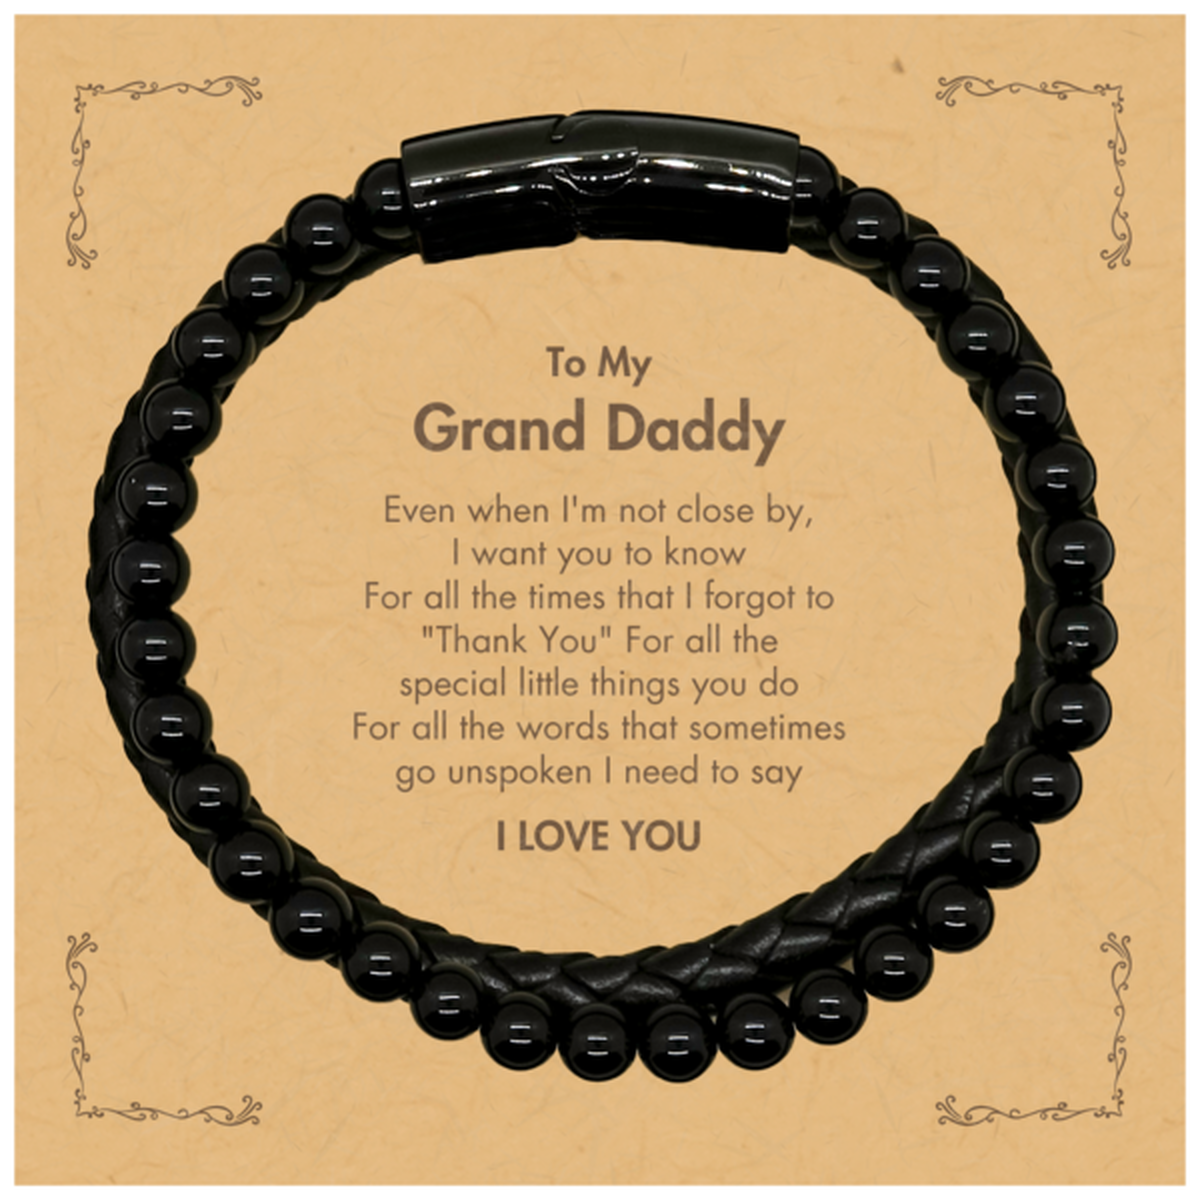 Thank You Gifts for Grand Daddy, Keepsake Stone Leather Bracelets Gifts for Grand Daddy Birthday Mother's day Father's Day Grand Daddy For all the words That sometimes go unspoken I need to say I LOVE YOU